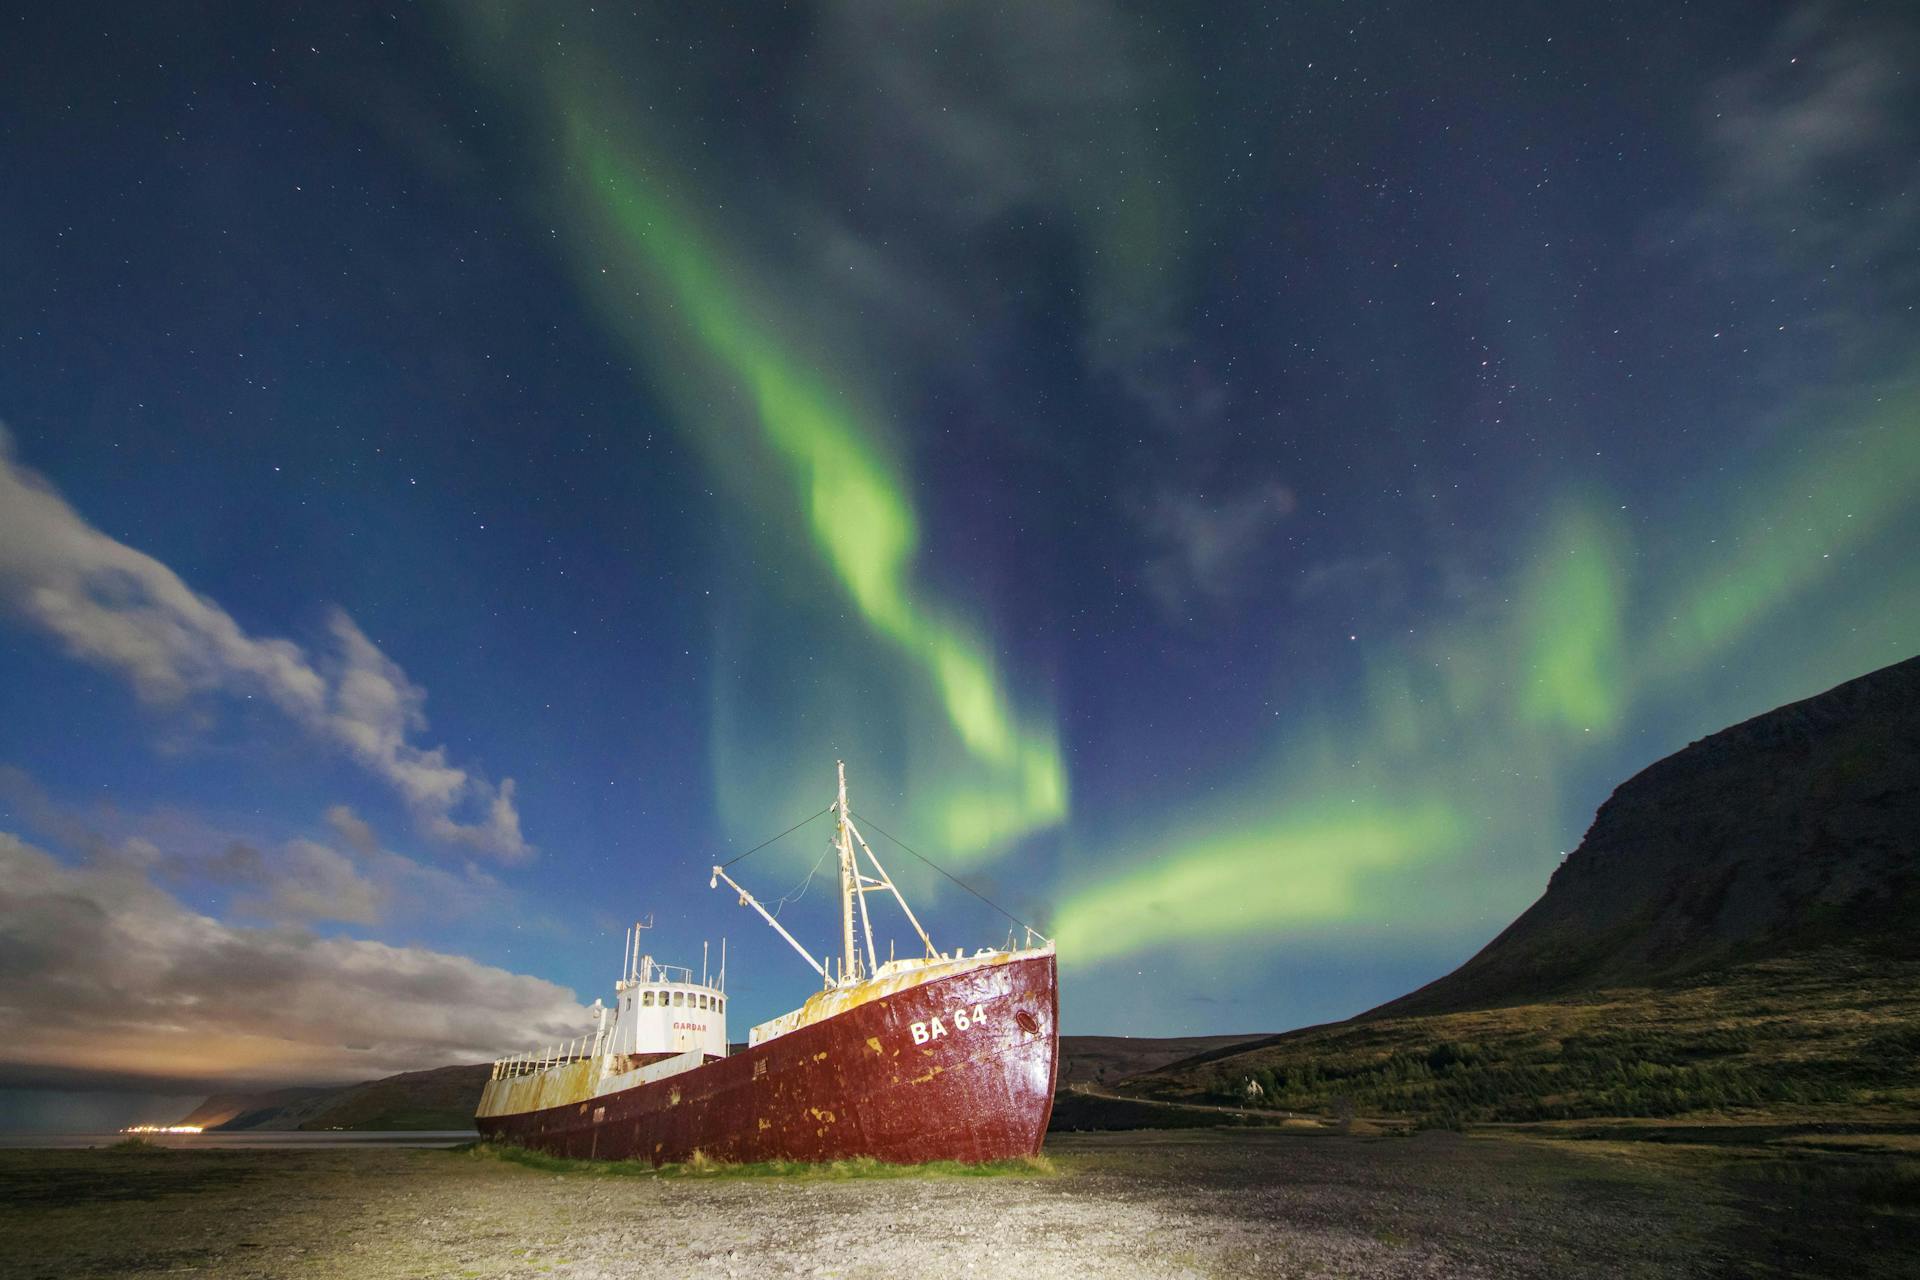 A shipwreck on a beach, northern lights dancing in the sky above. In the southern part of the Westfjords, Iceland. 